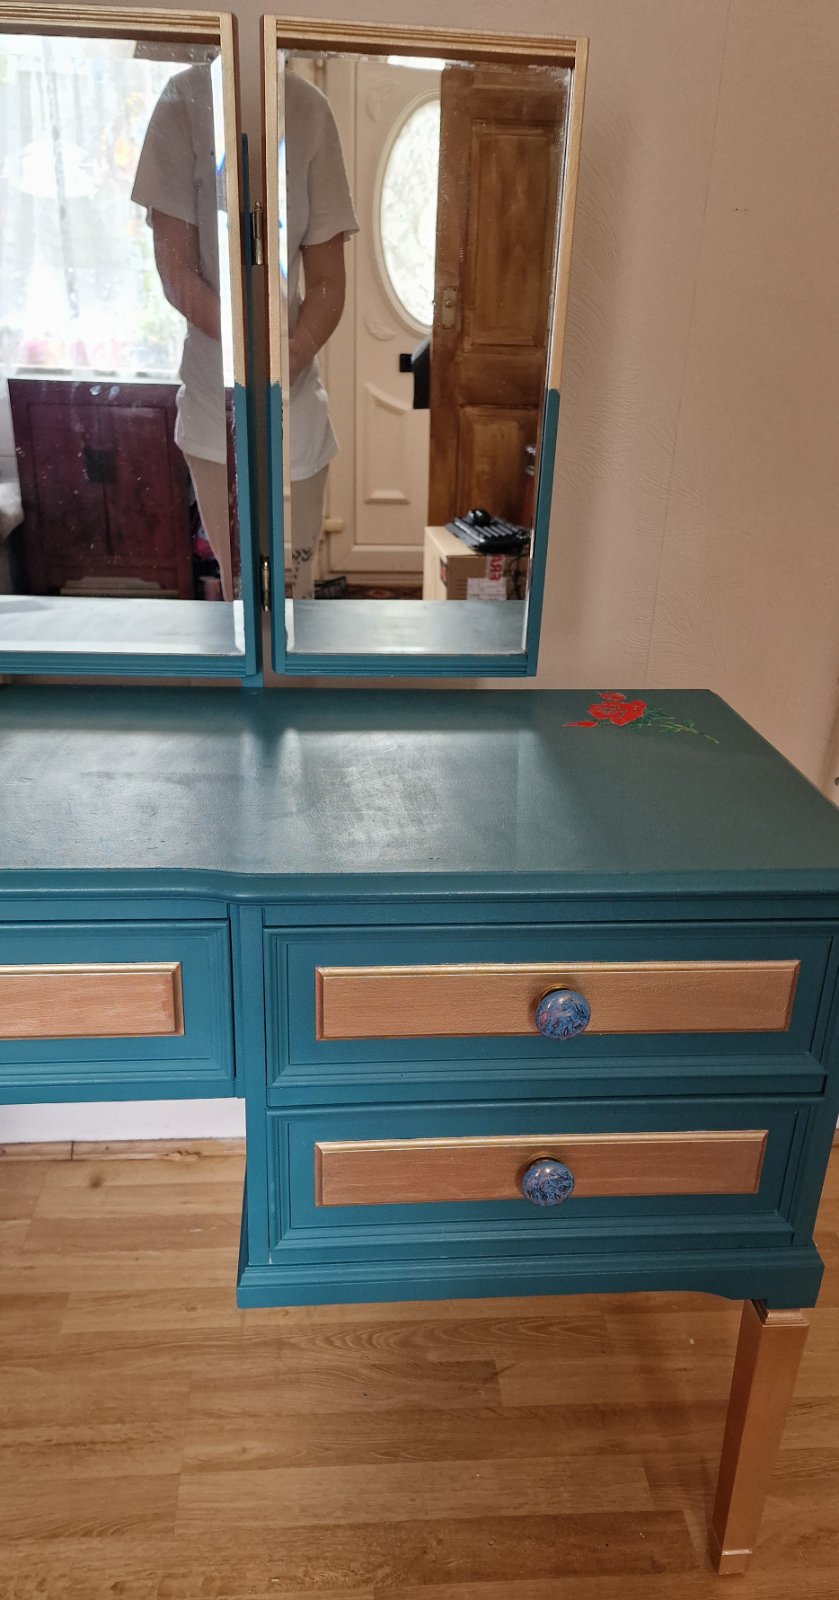 Dressing Table with Triptych Mirror, Hand Painted Red Roses over Peacock Blue and Rose Gold